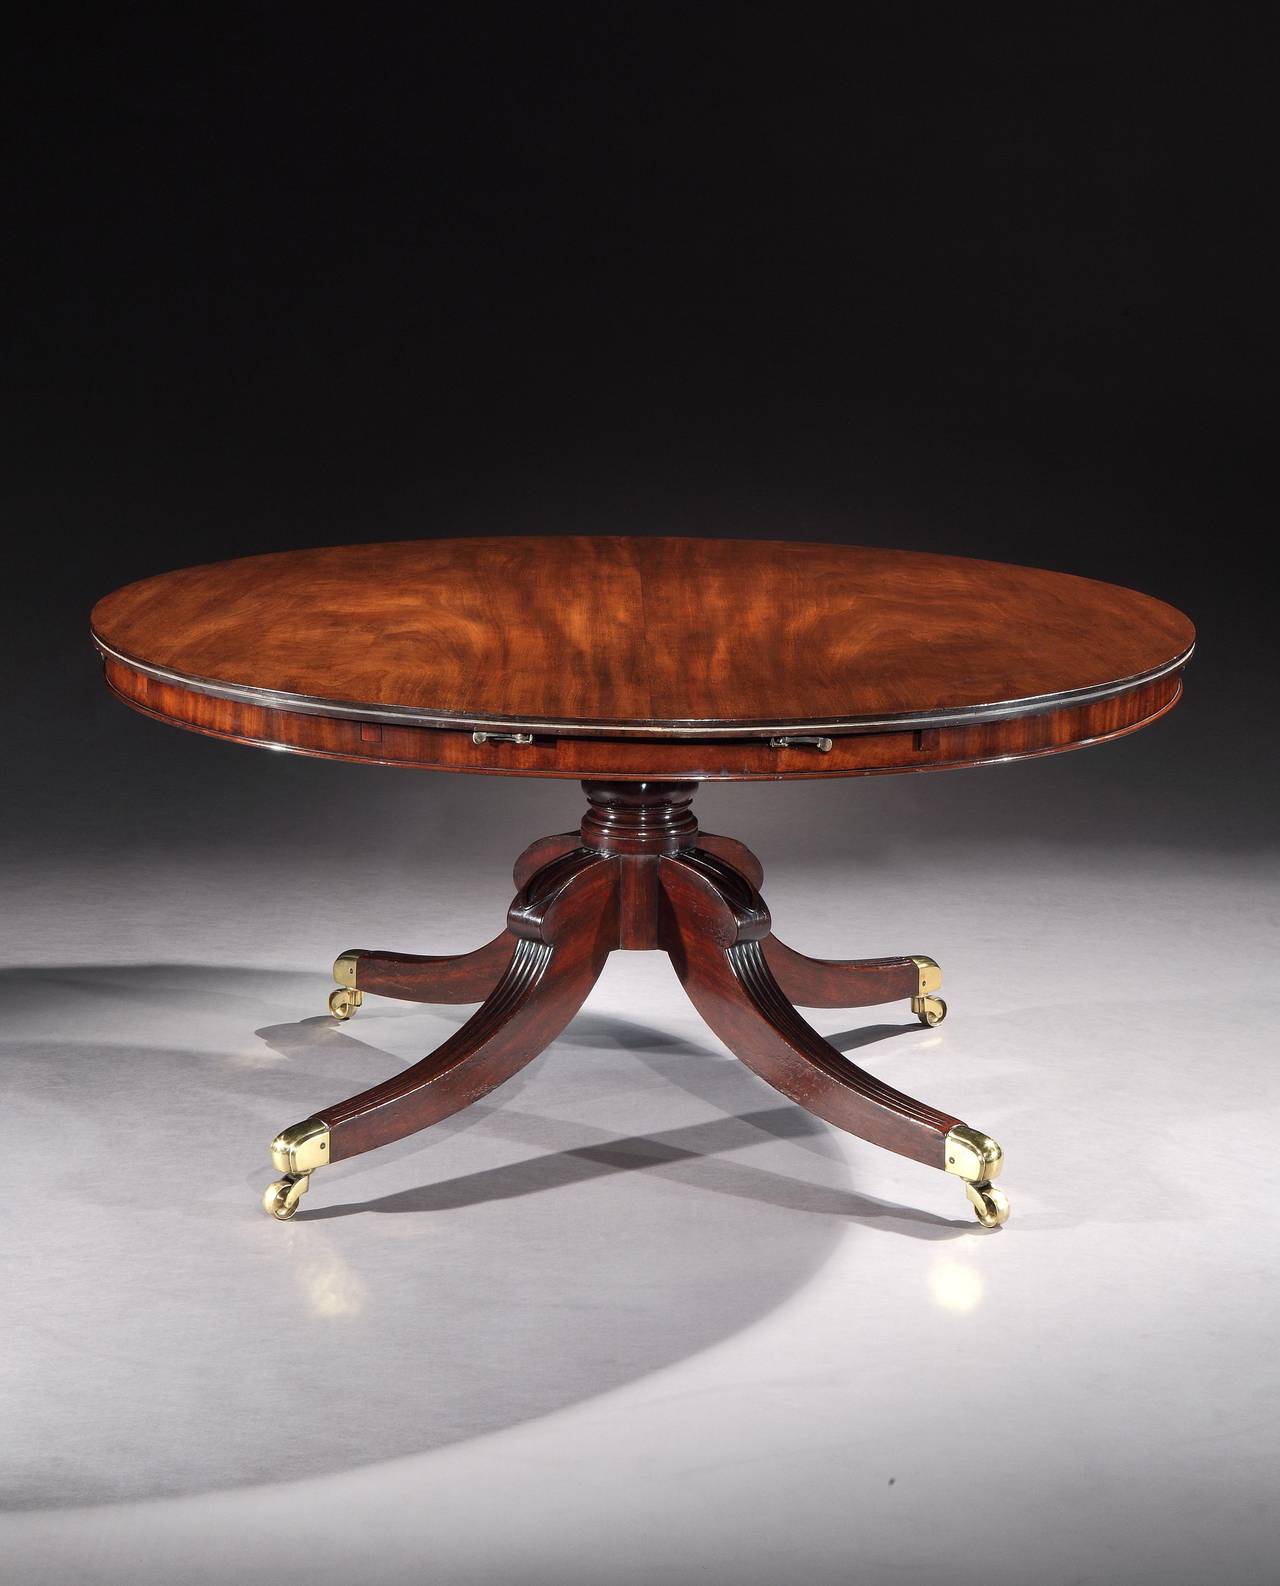 An early 19th century circular extending dining table retaining the original quarter round extending leaves, having a tip-up top supported by a turned baluster column with four reeded, hipped splay legs terminating in the original brass cap